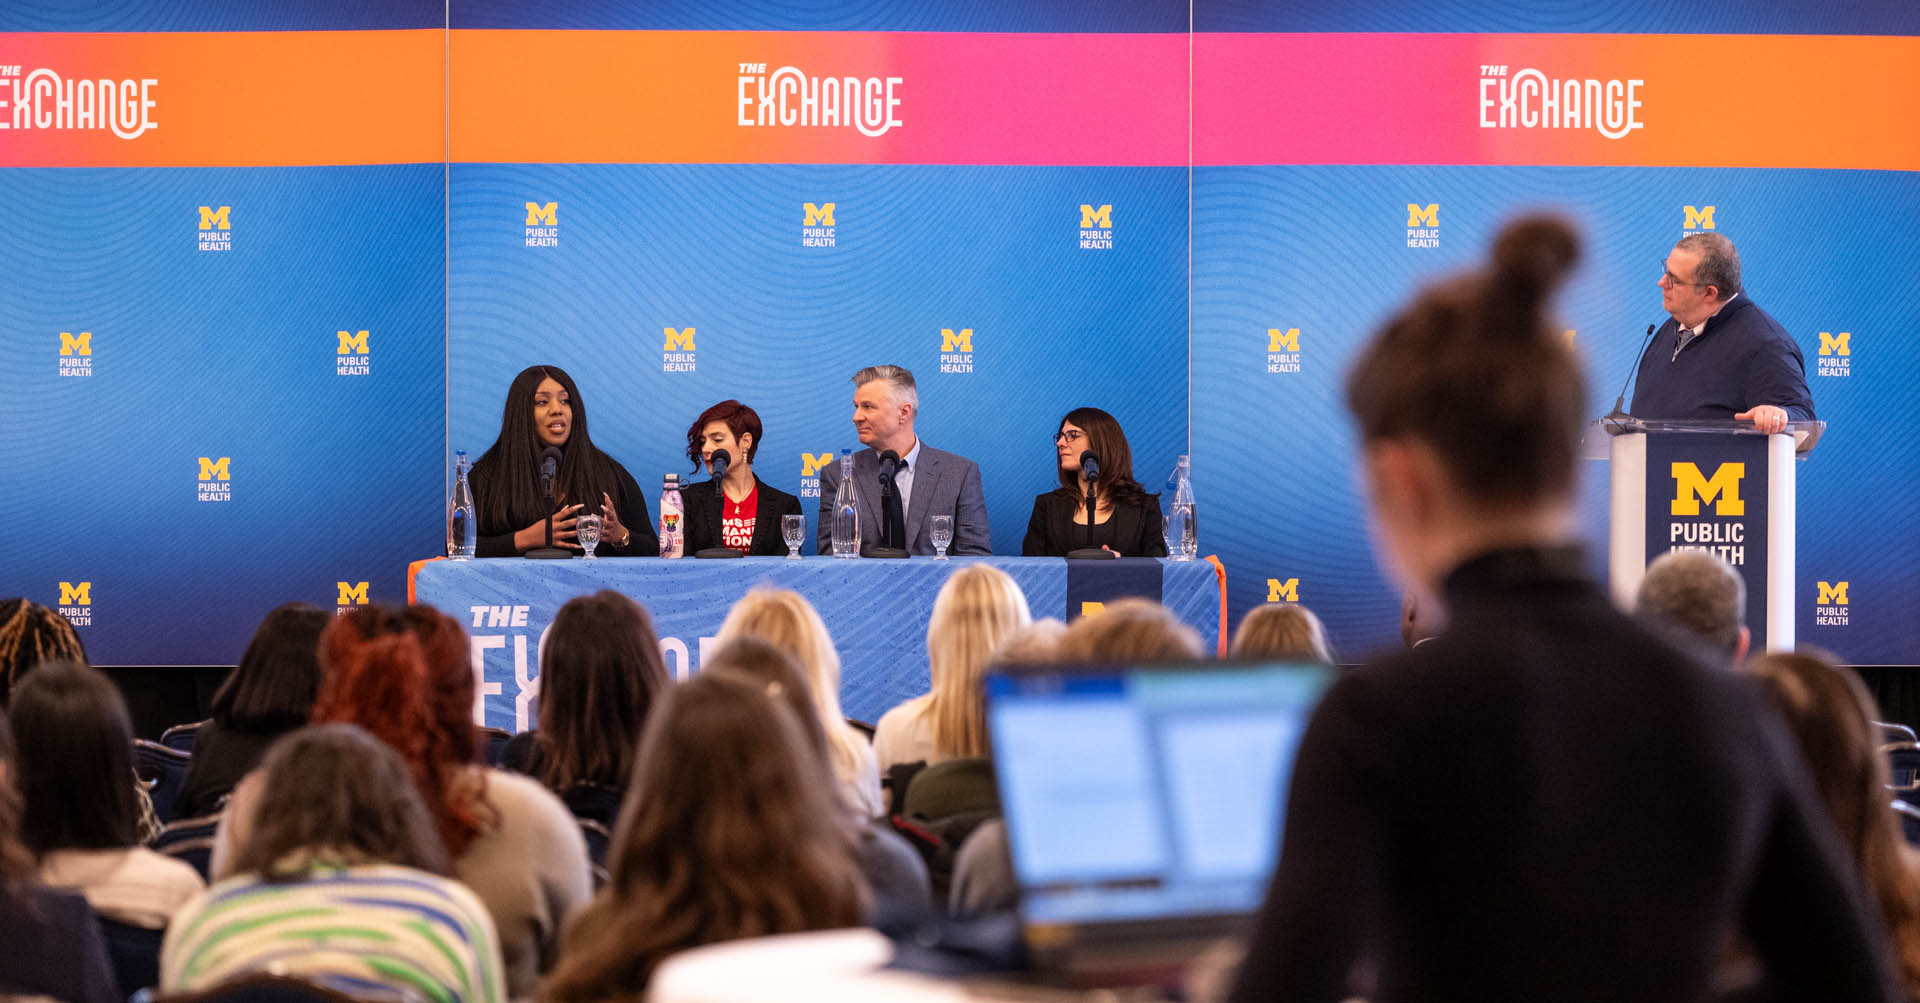 5 Key Takeaways from The Exchange: Public Health Approaches to Ending Gun Violence